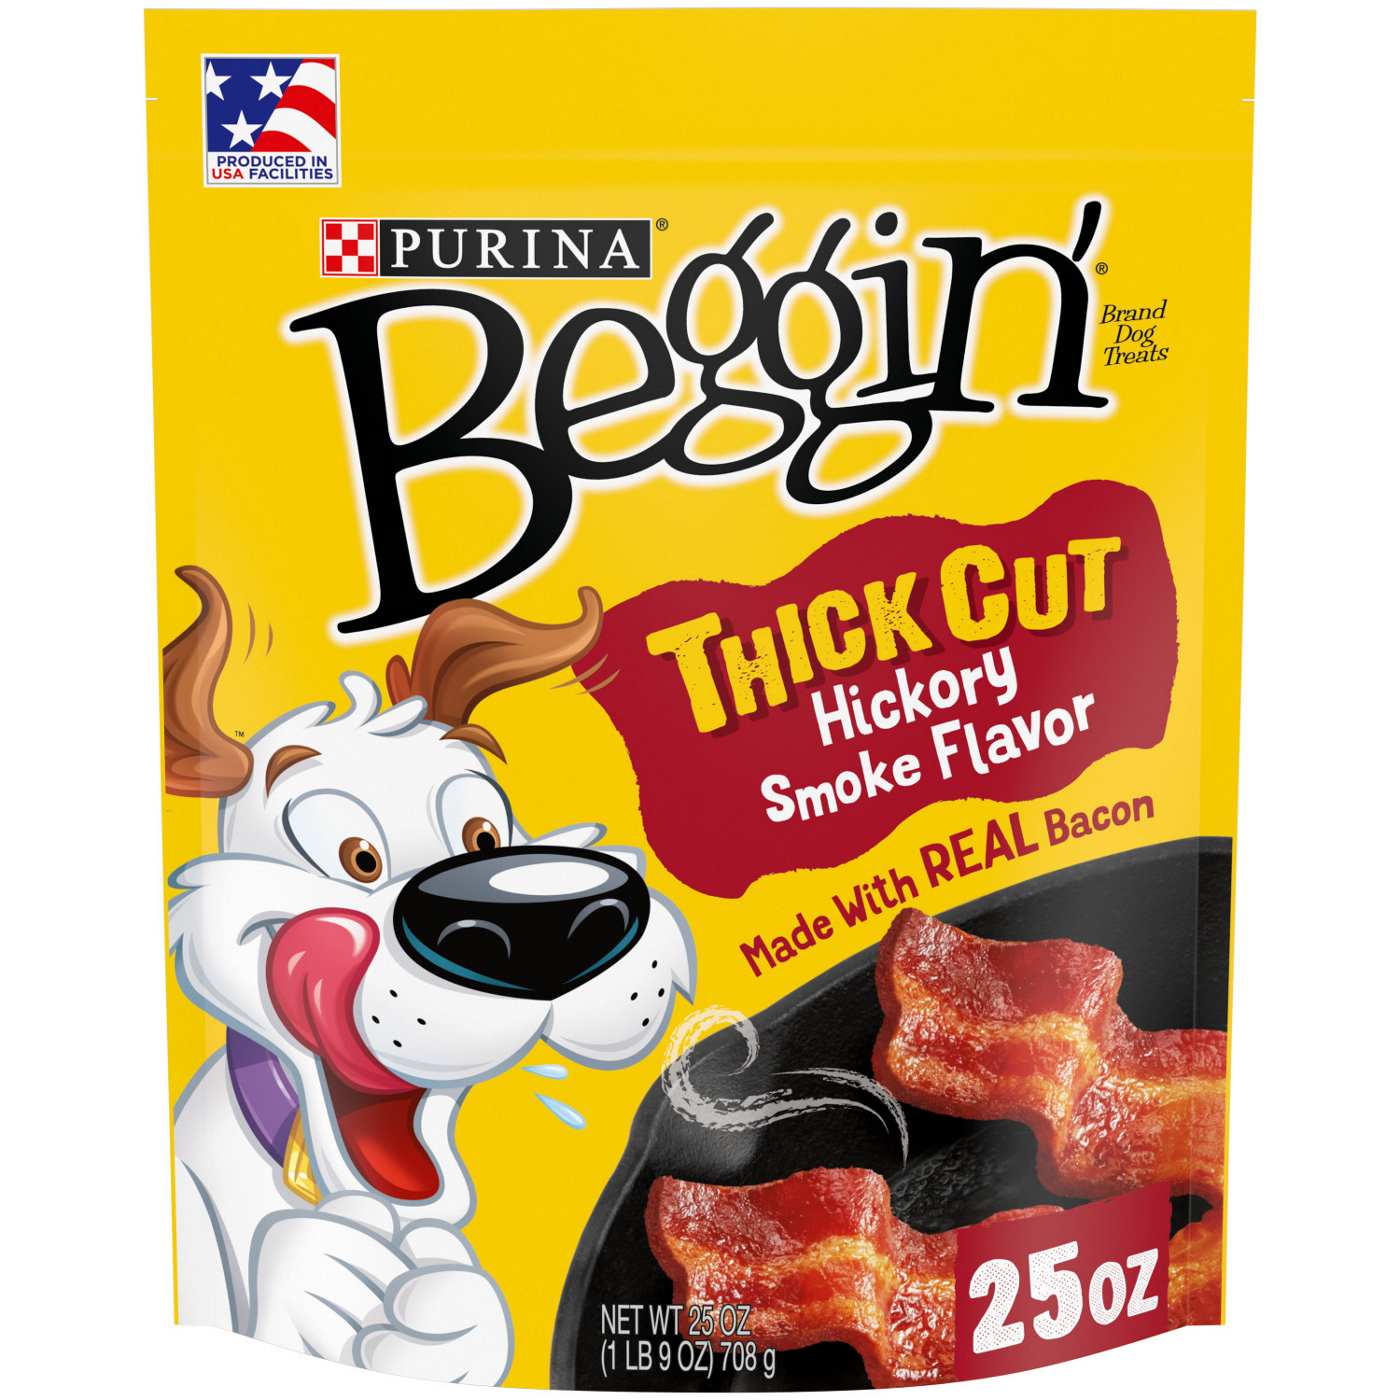 Beggin' Purina Beggin' Strips With Real Meat Dog Treats, Thick Cut Hickory Smoke Flavor; image 1 of 5